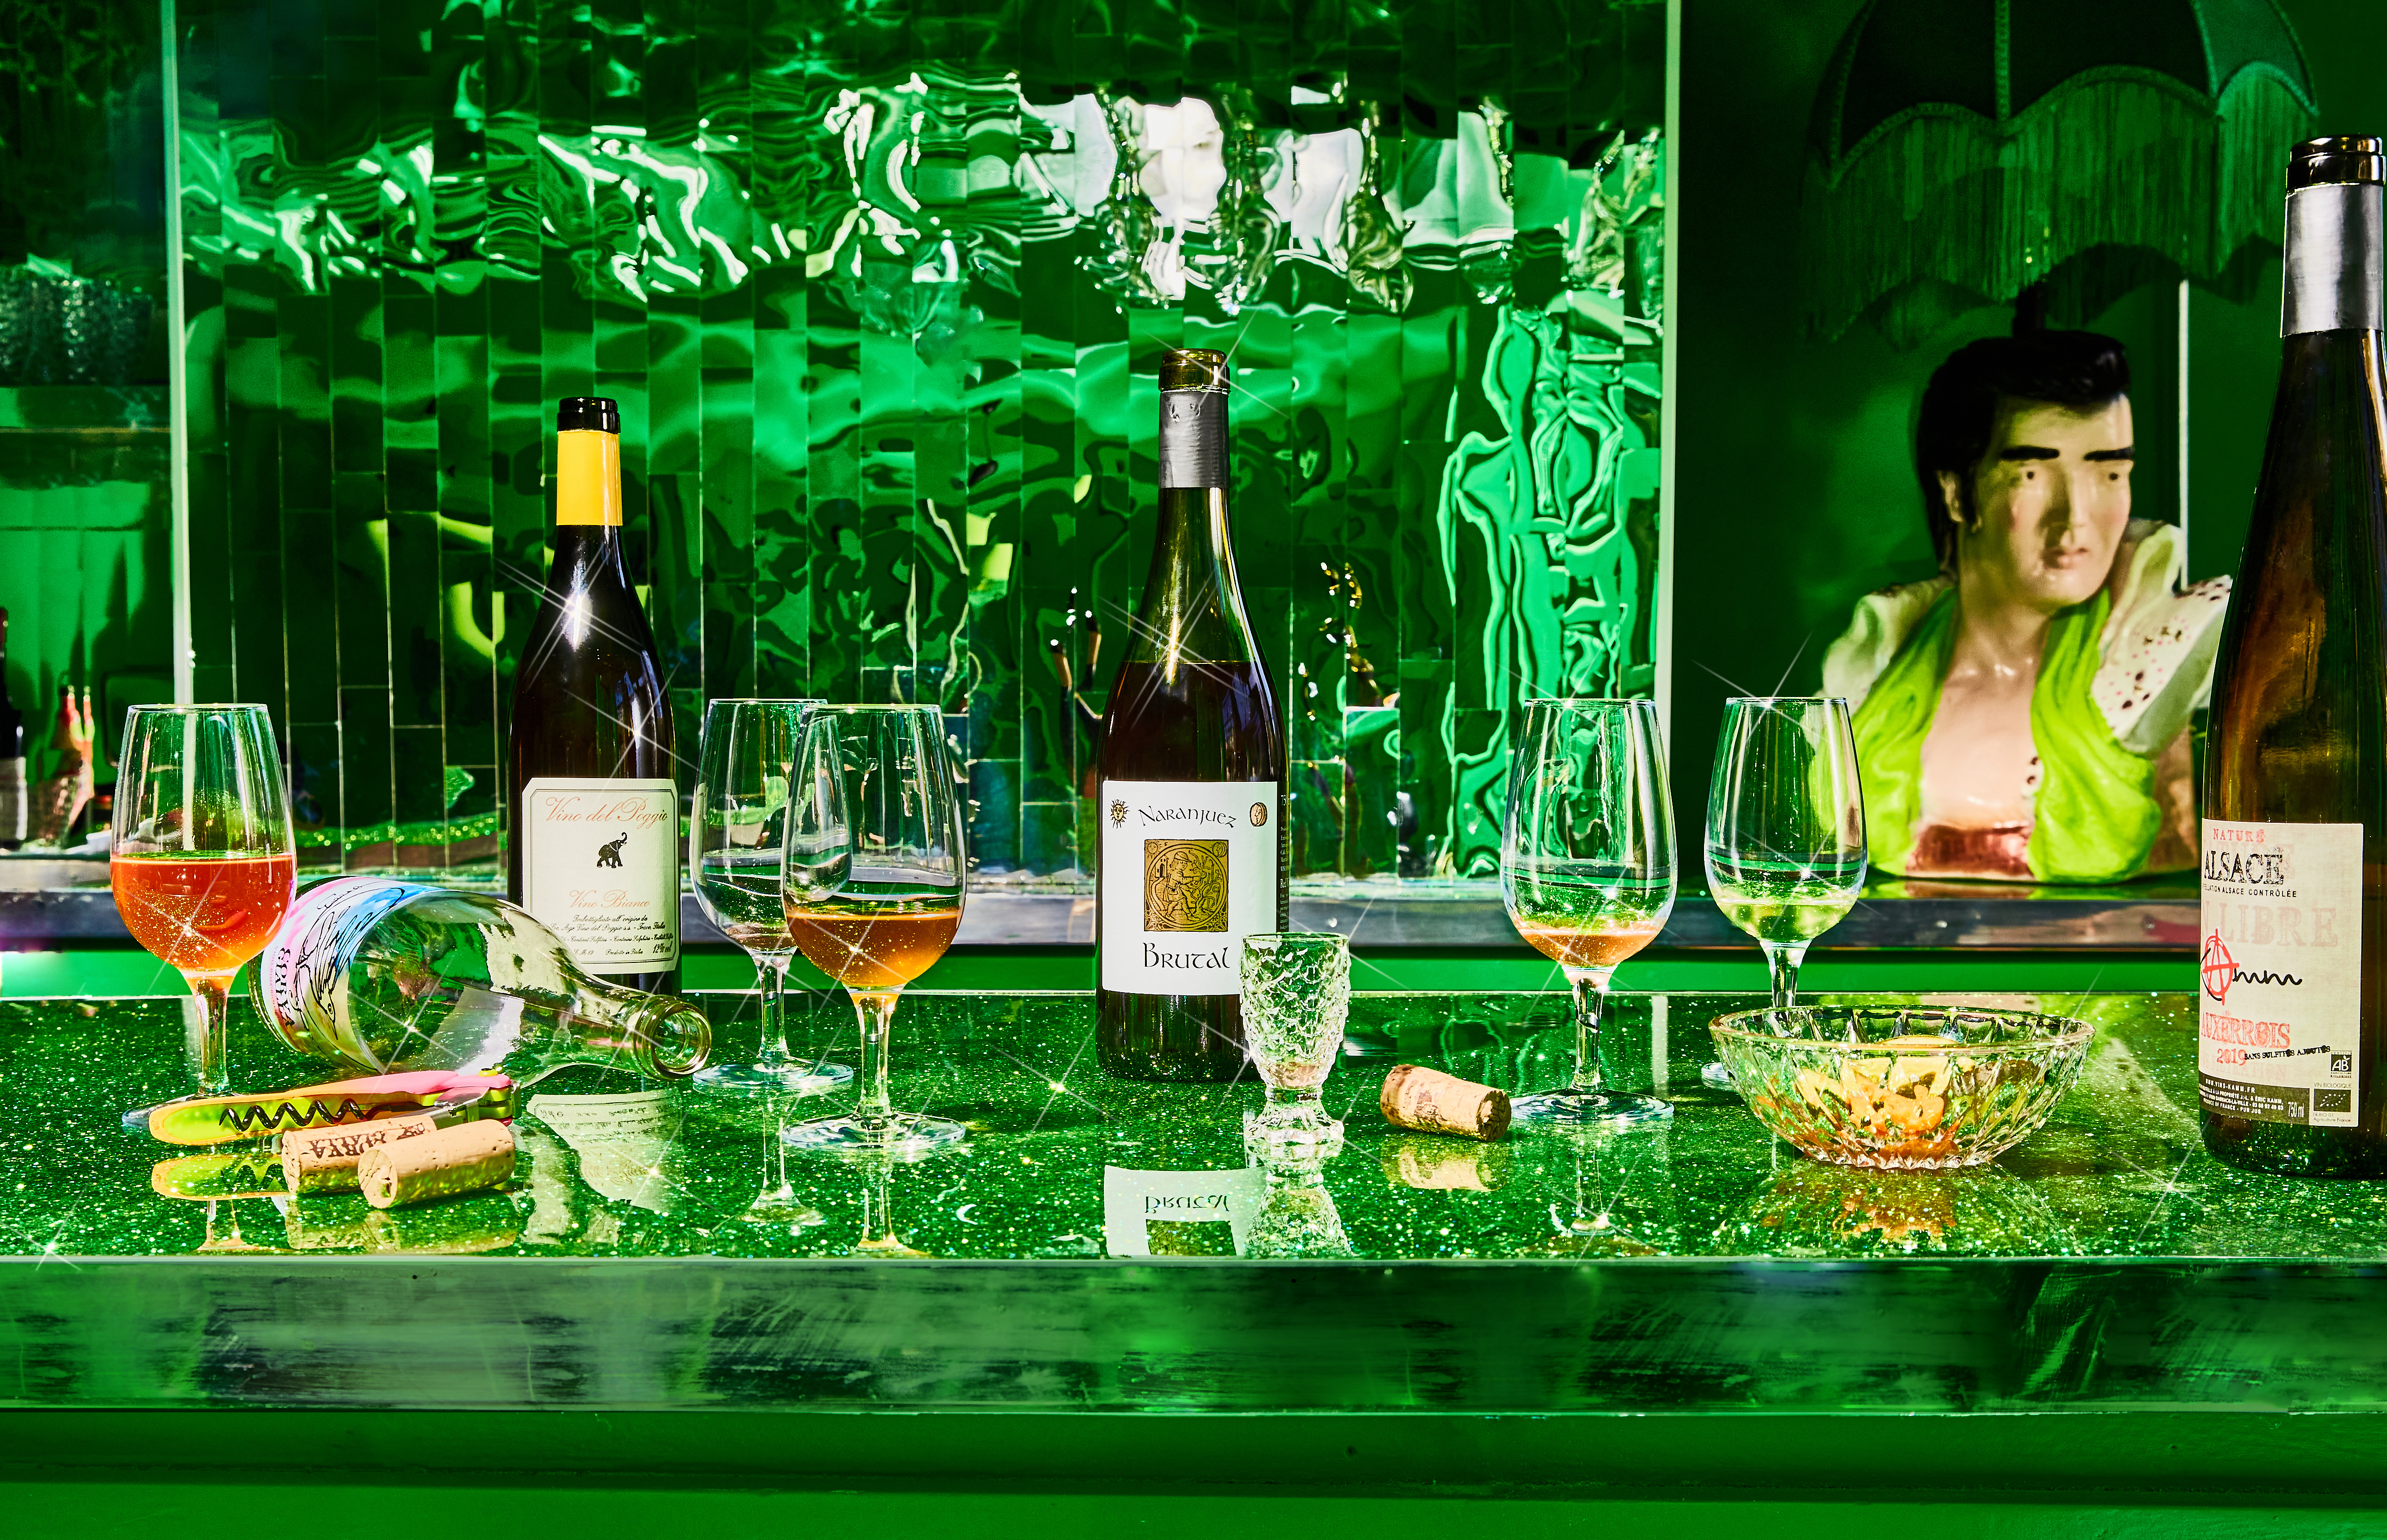 Two bottles of wine and several glasses on top of a glittery green bar.